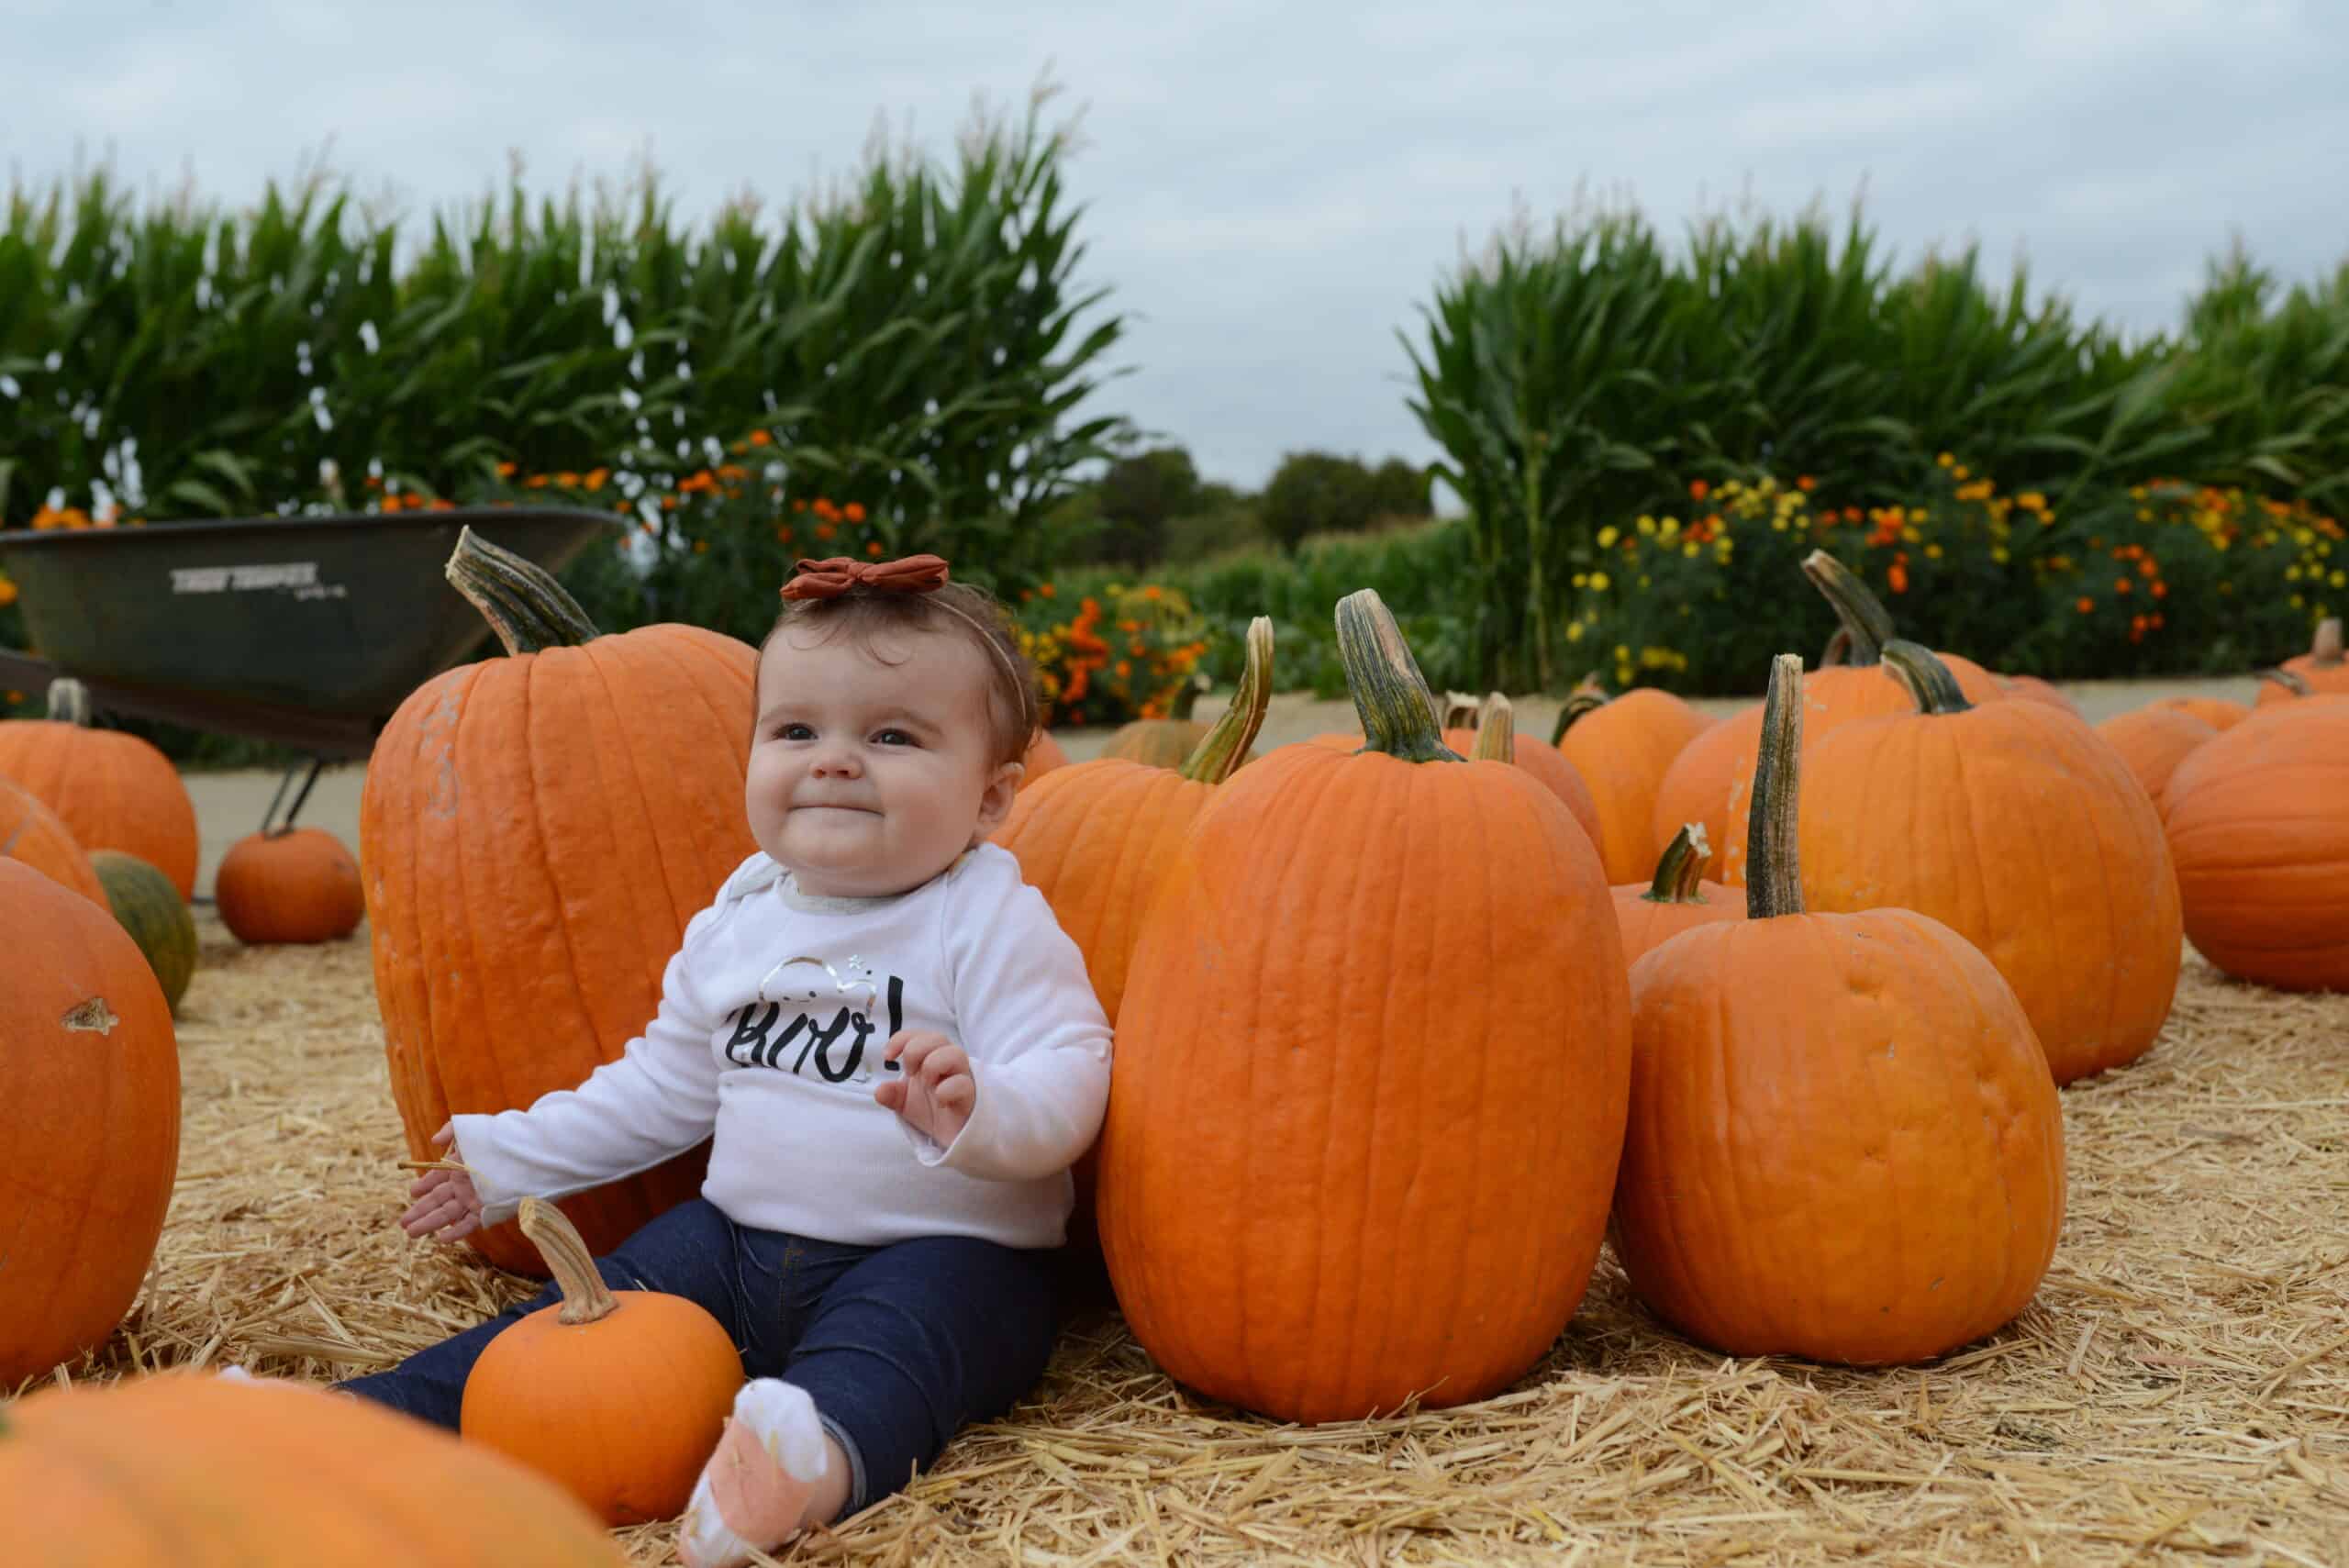 Our Halloween Guide – Los Angeles and Beyond includes Underwood Farms